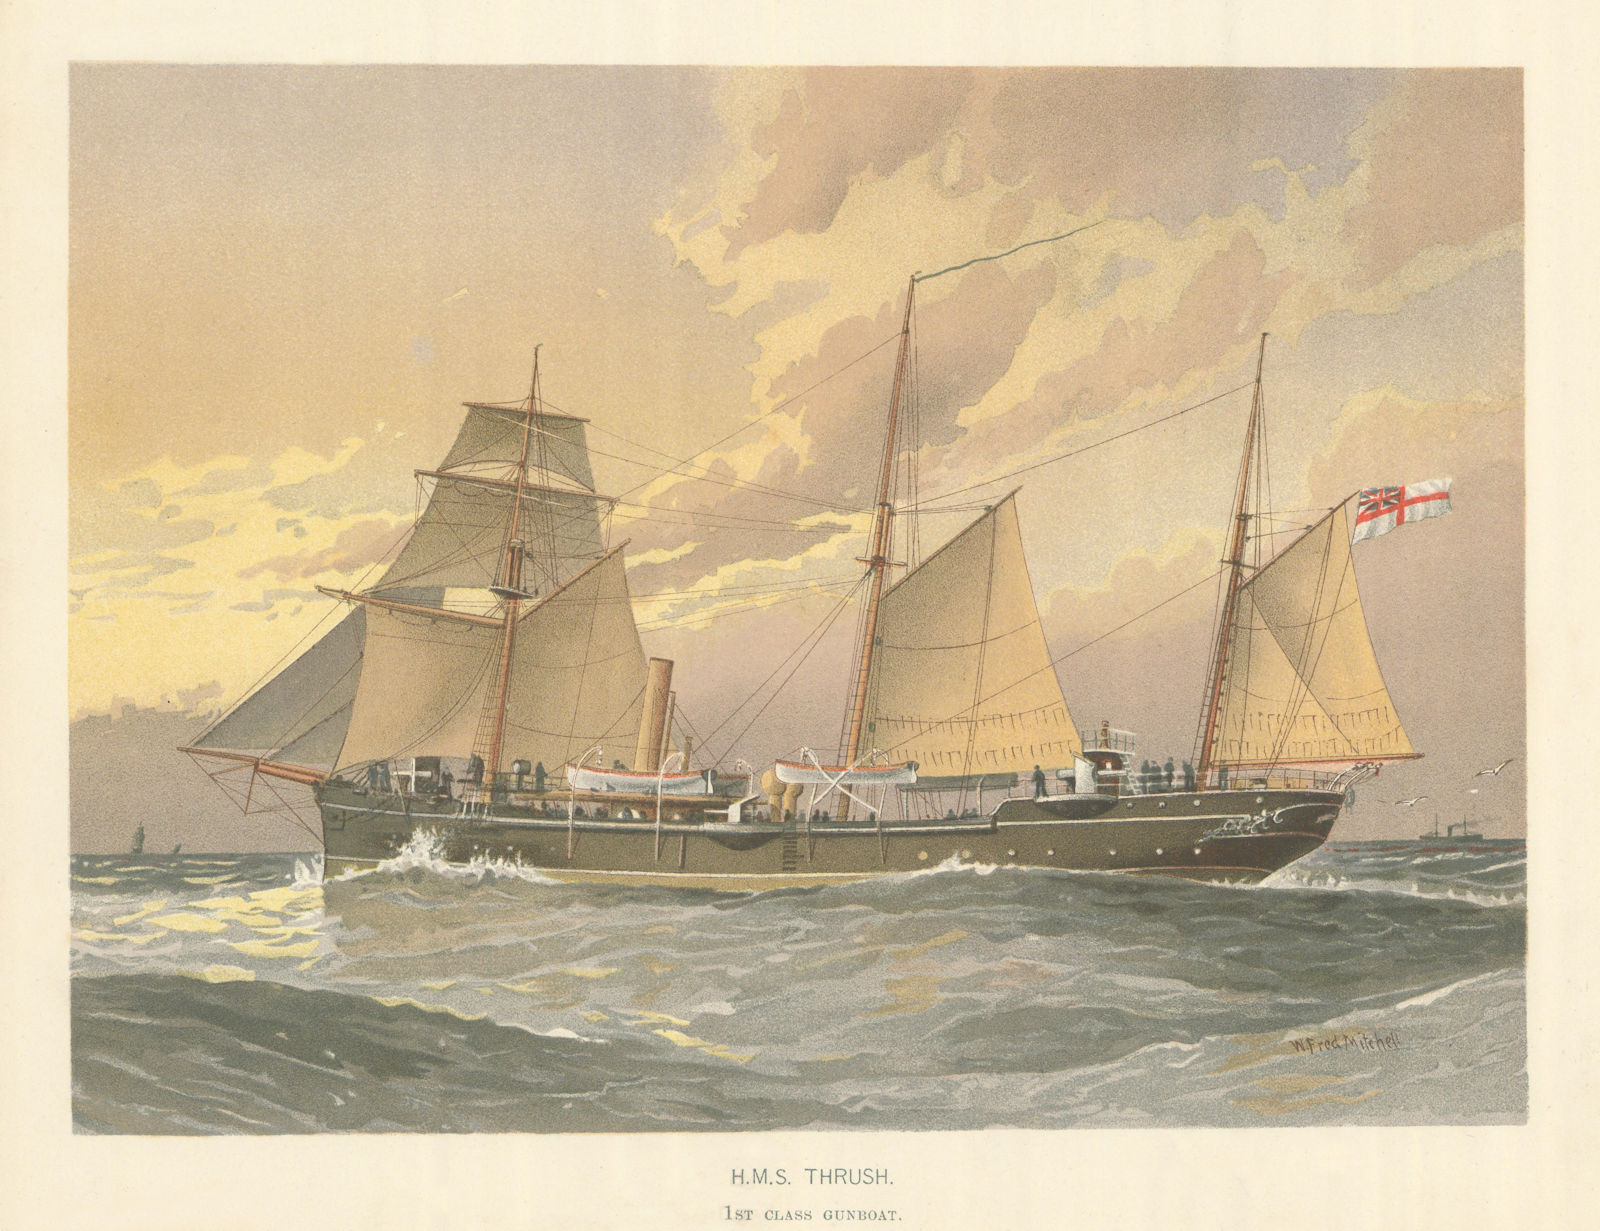 Associate Product H.M.S. "Thrush" - 1st class gunboat (1889) by W.F. Mitchell. Royal Navy 1893